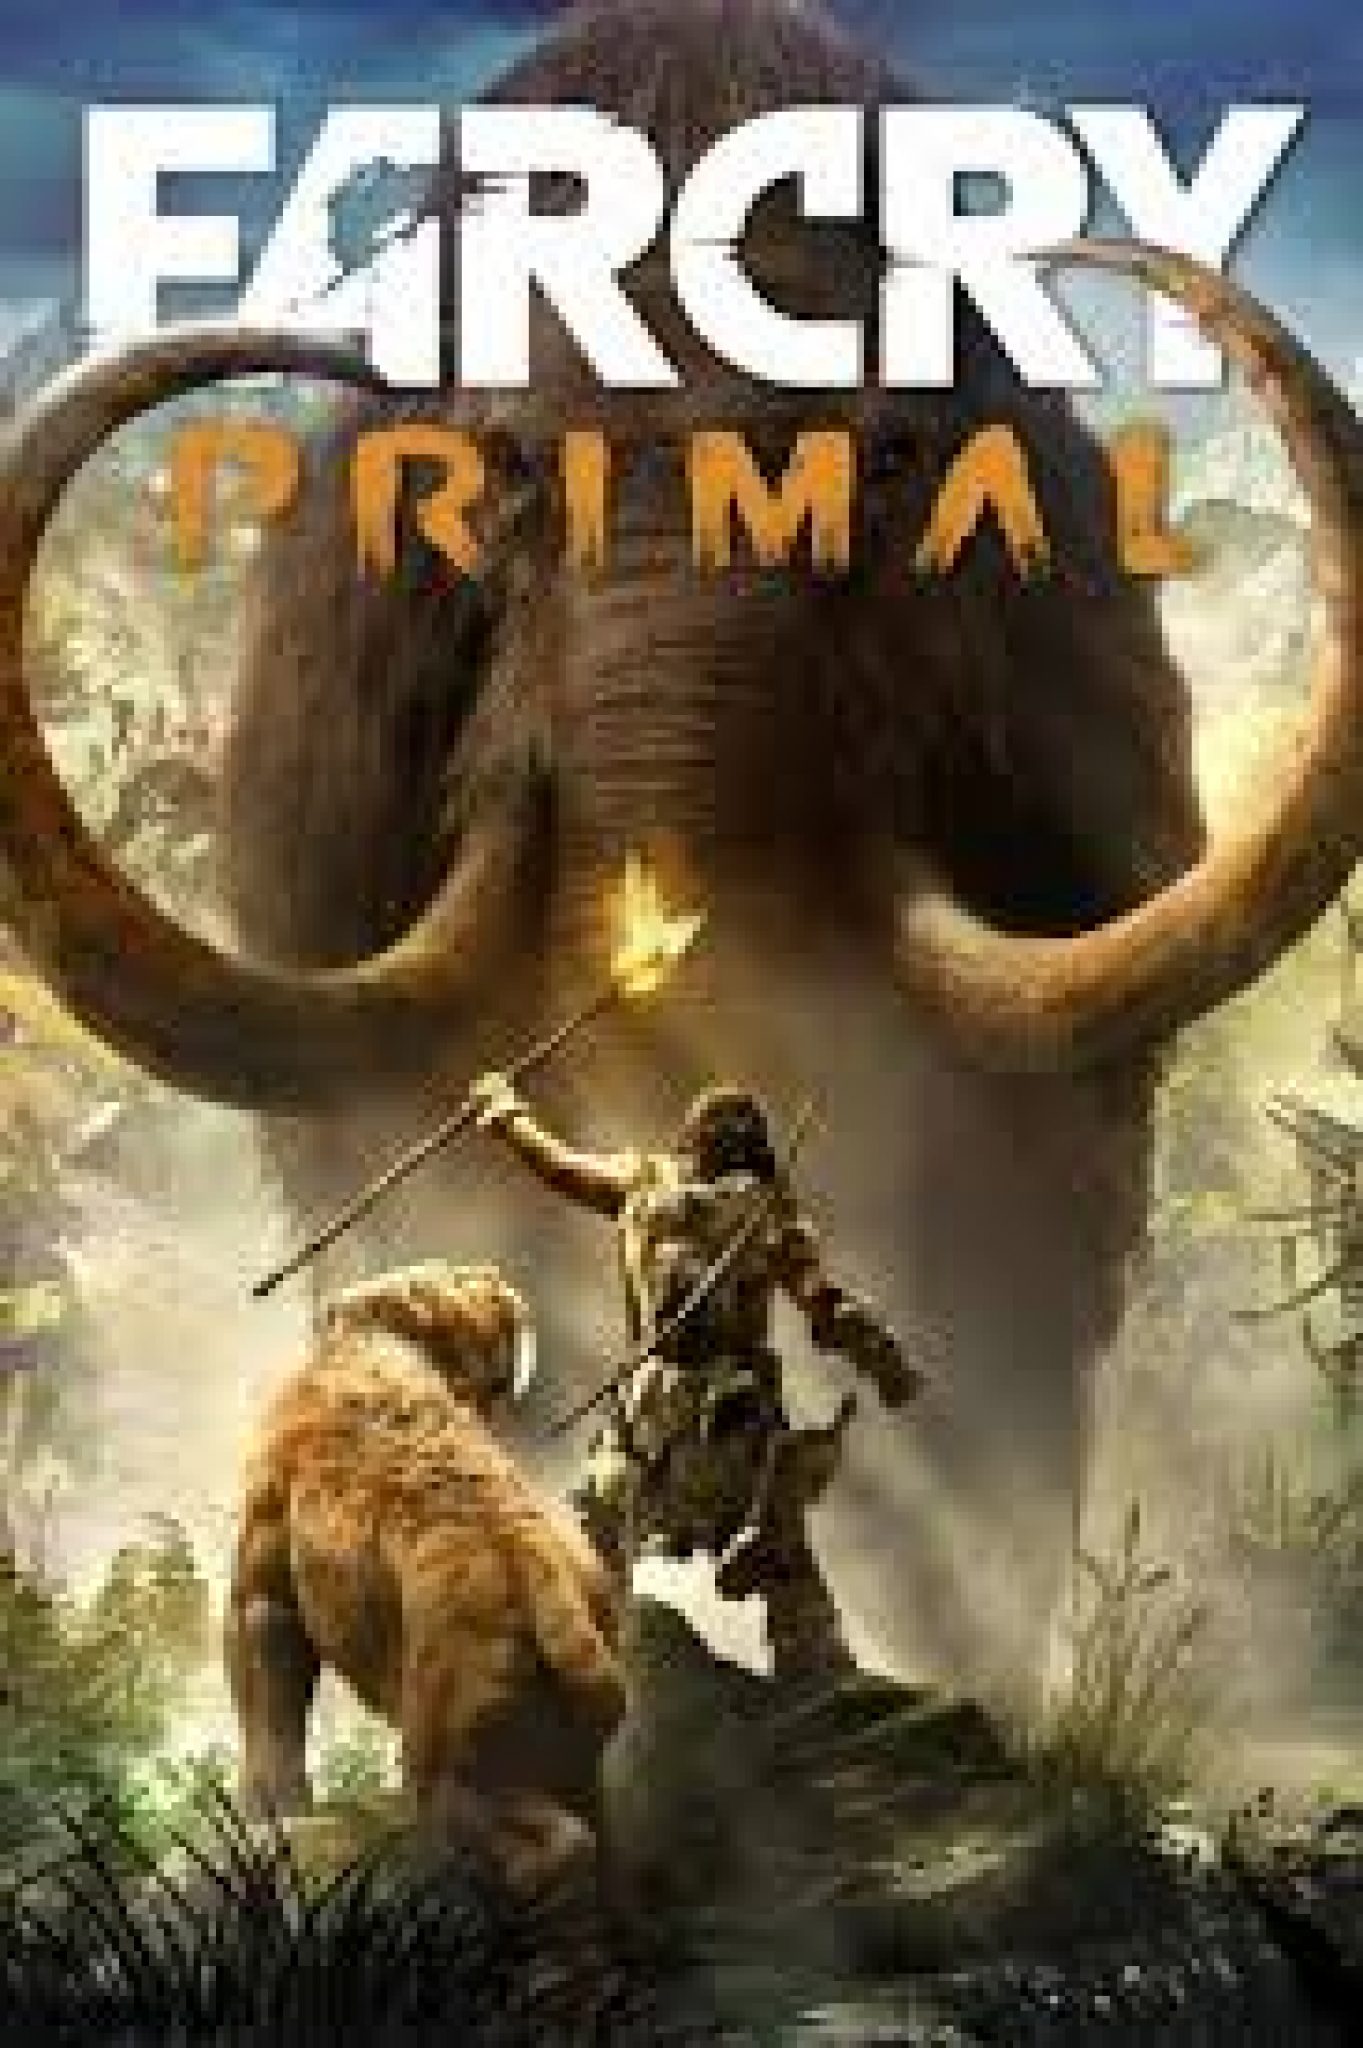 farcry primal download